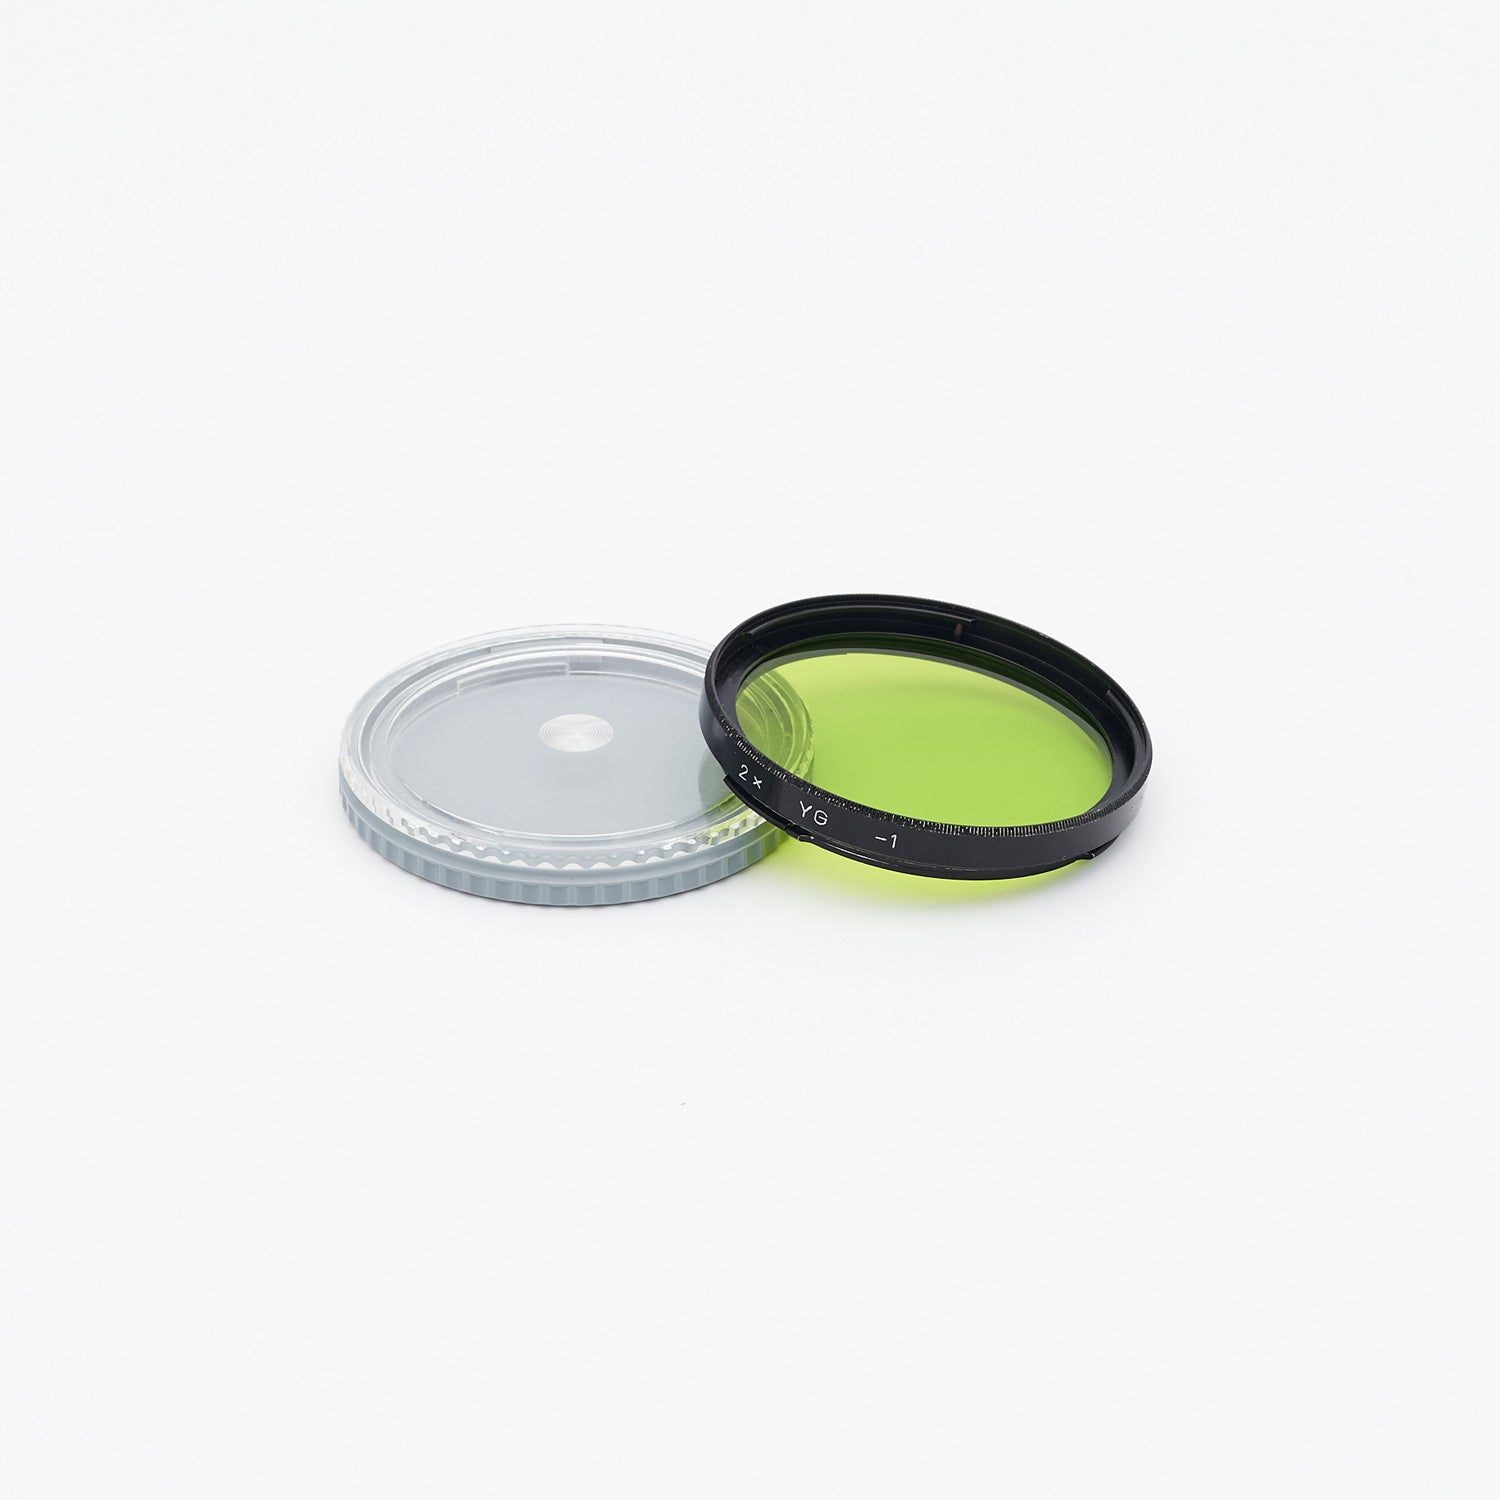 Hasselblad Filter YG 2x -1 (int. S/N 0063)